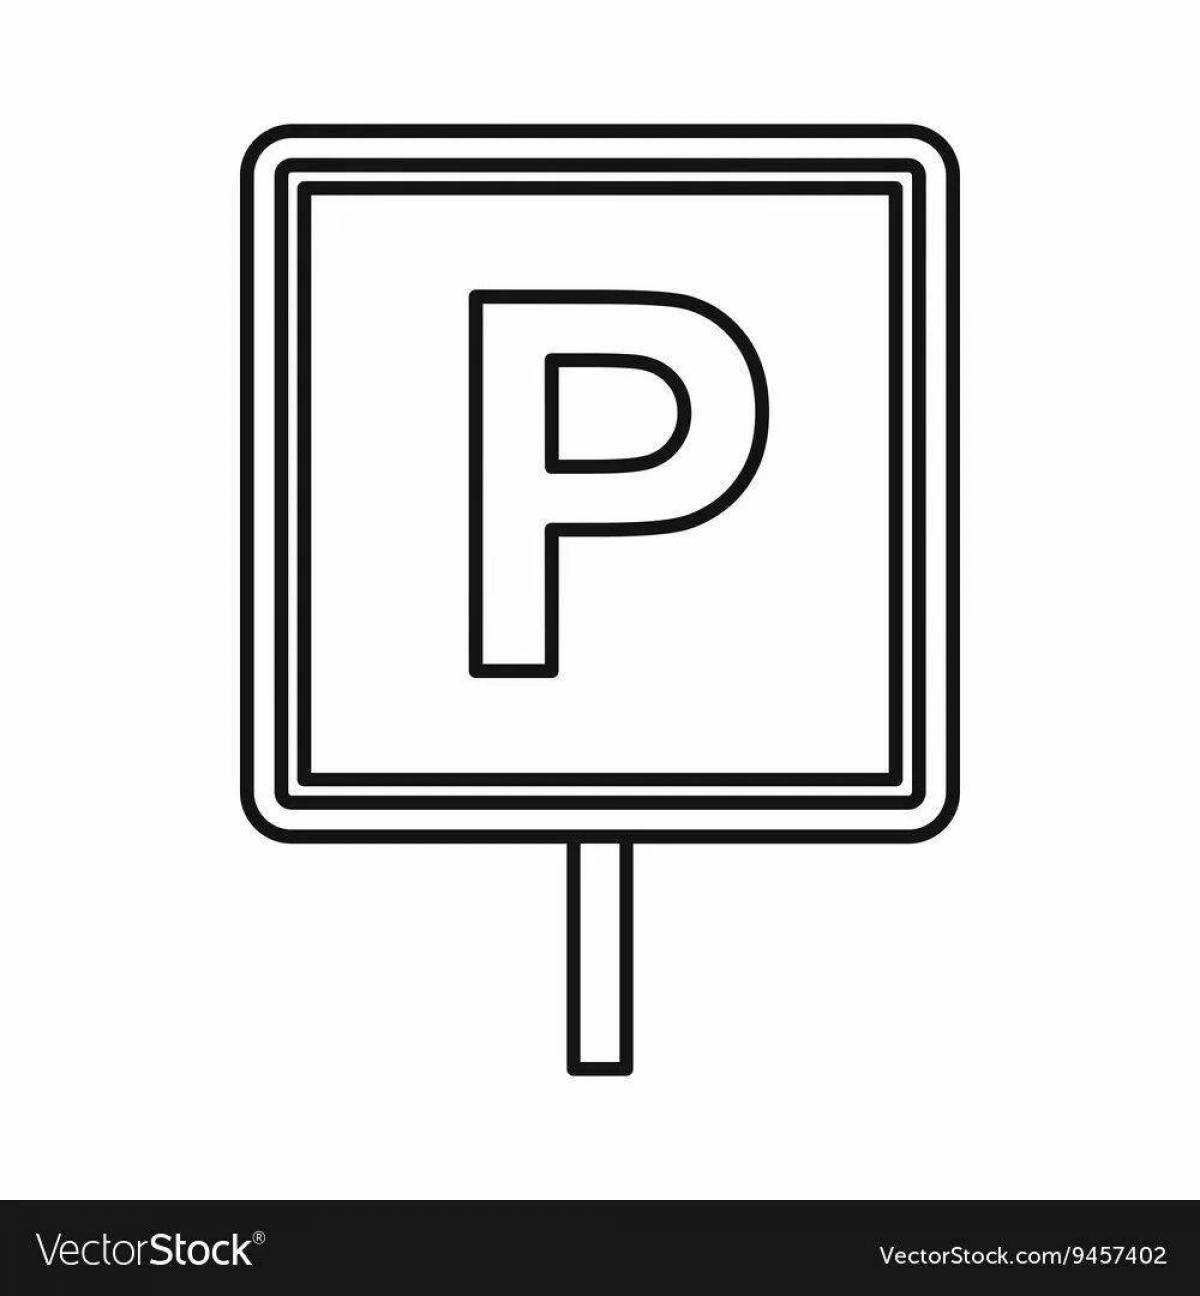 Colouring page awesome parking signs